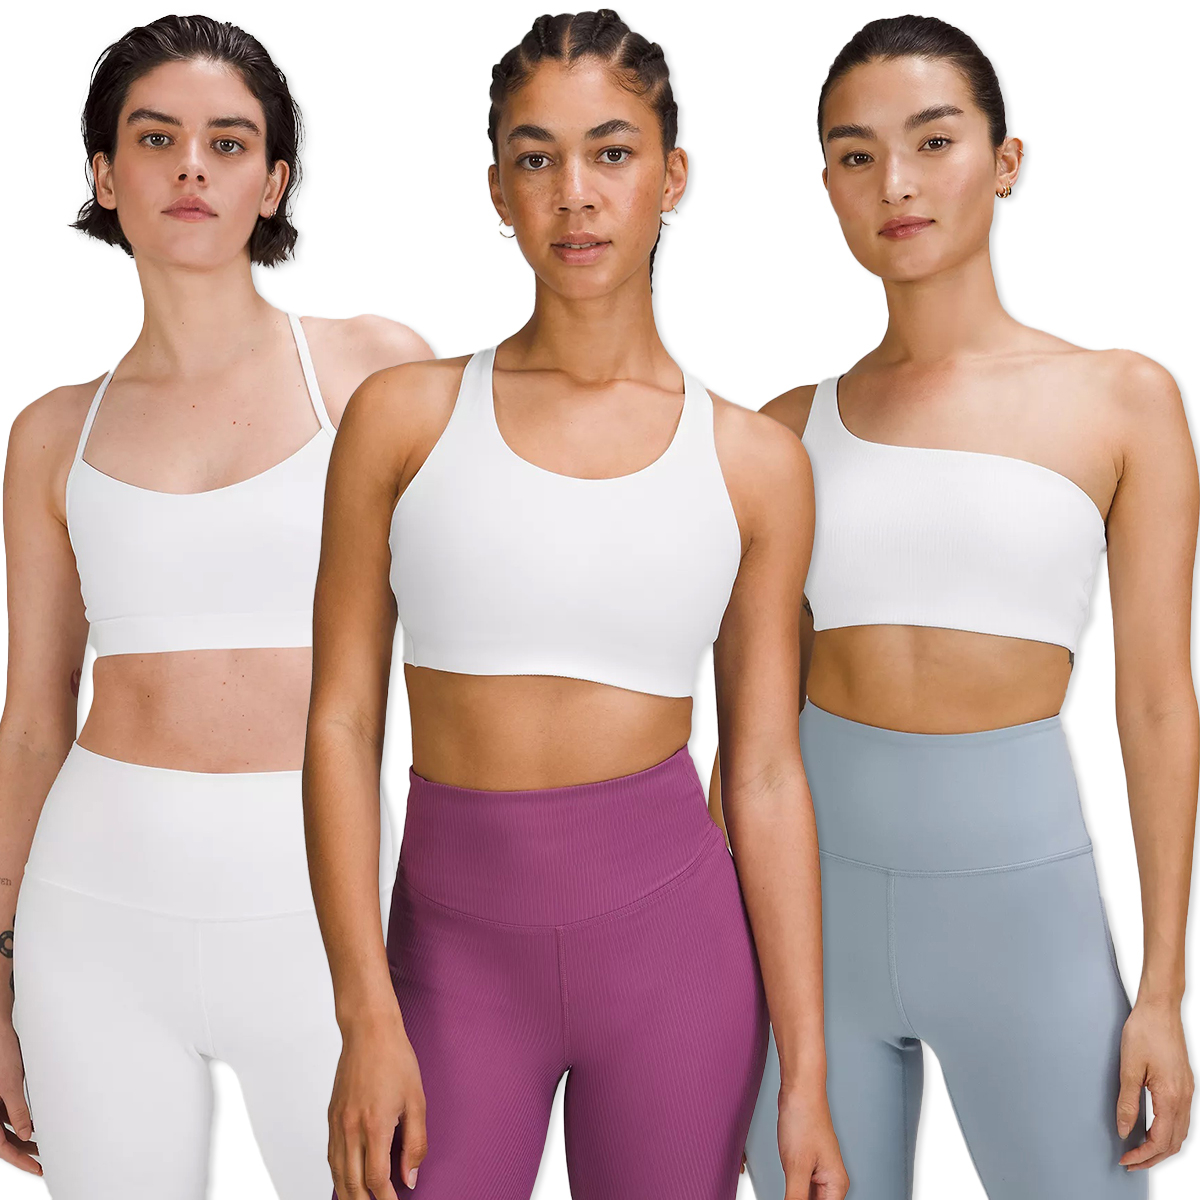 Has anyone tried the nulu strappy yoga bra before? How's the fit